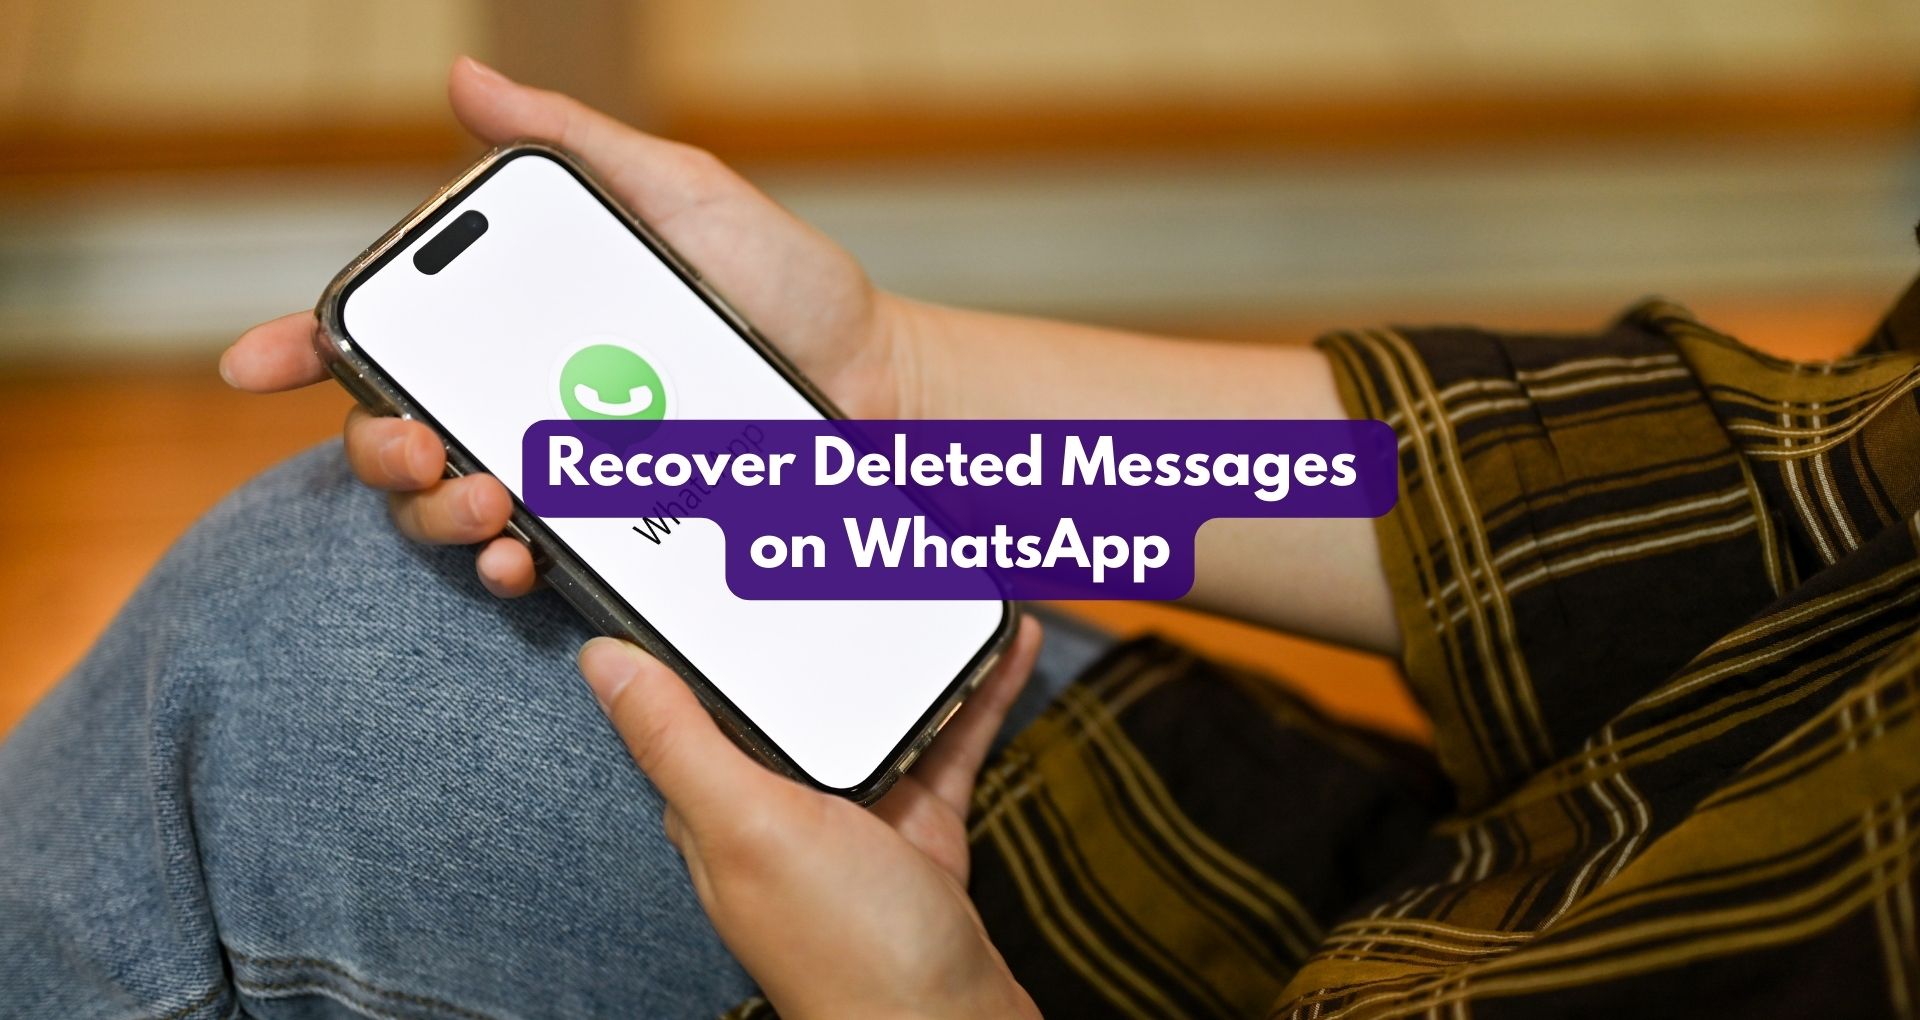 How to Recover Deleted Messages on WhatsApp?